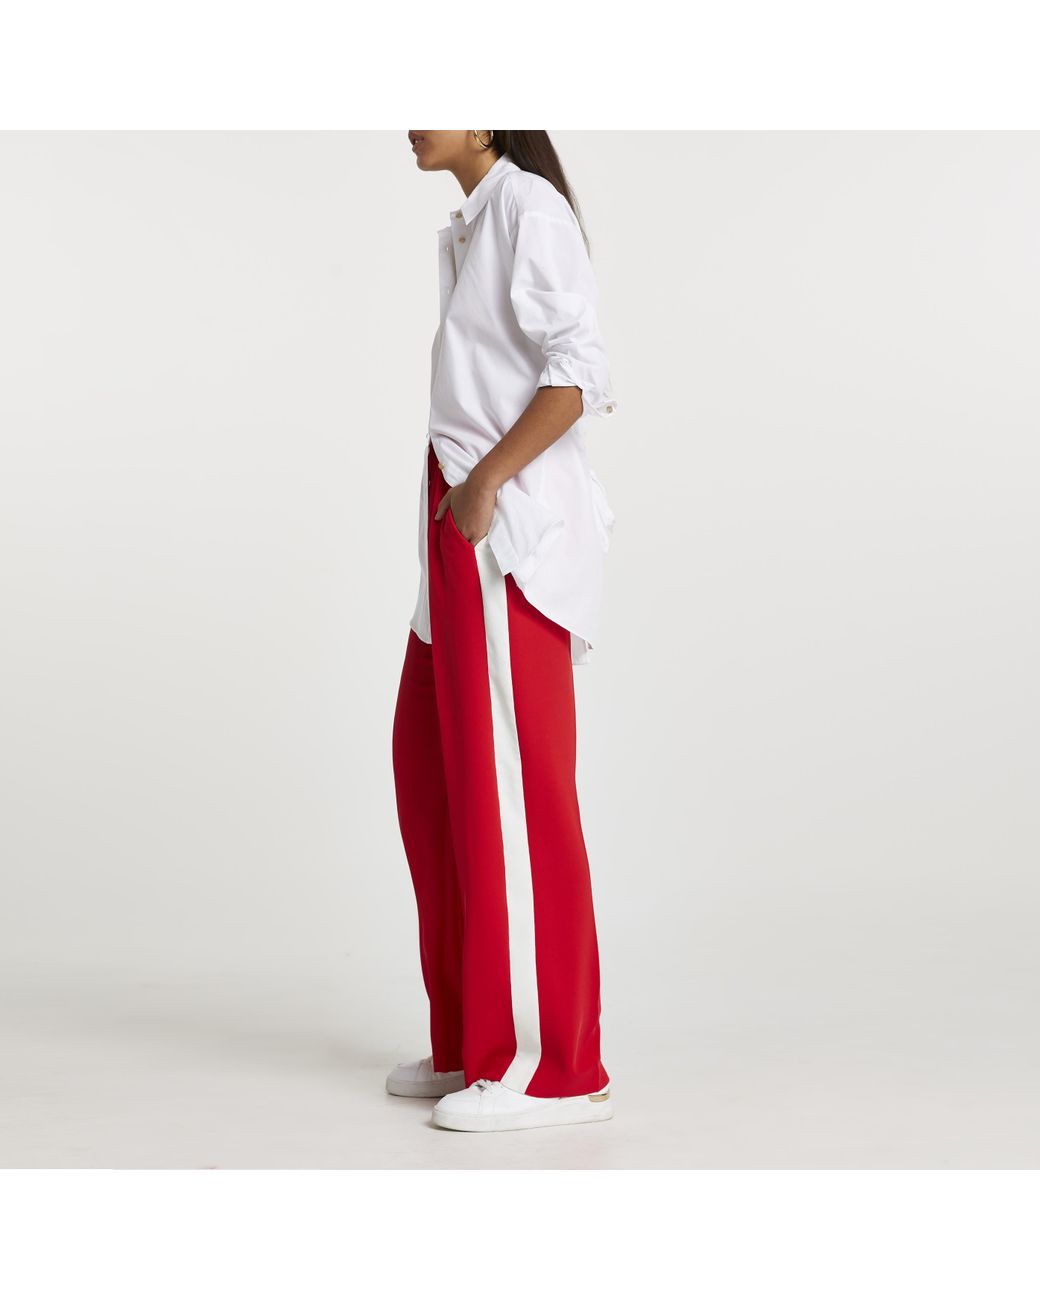 Top more than 68 river island stripe trousers super hot - in.cdgdbentre